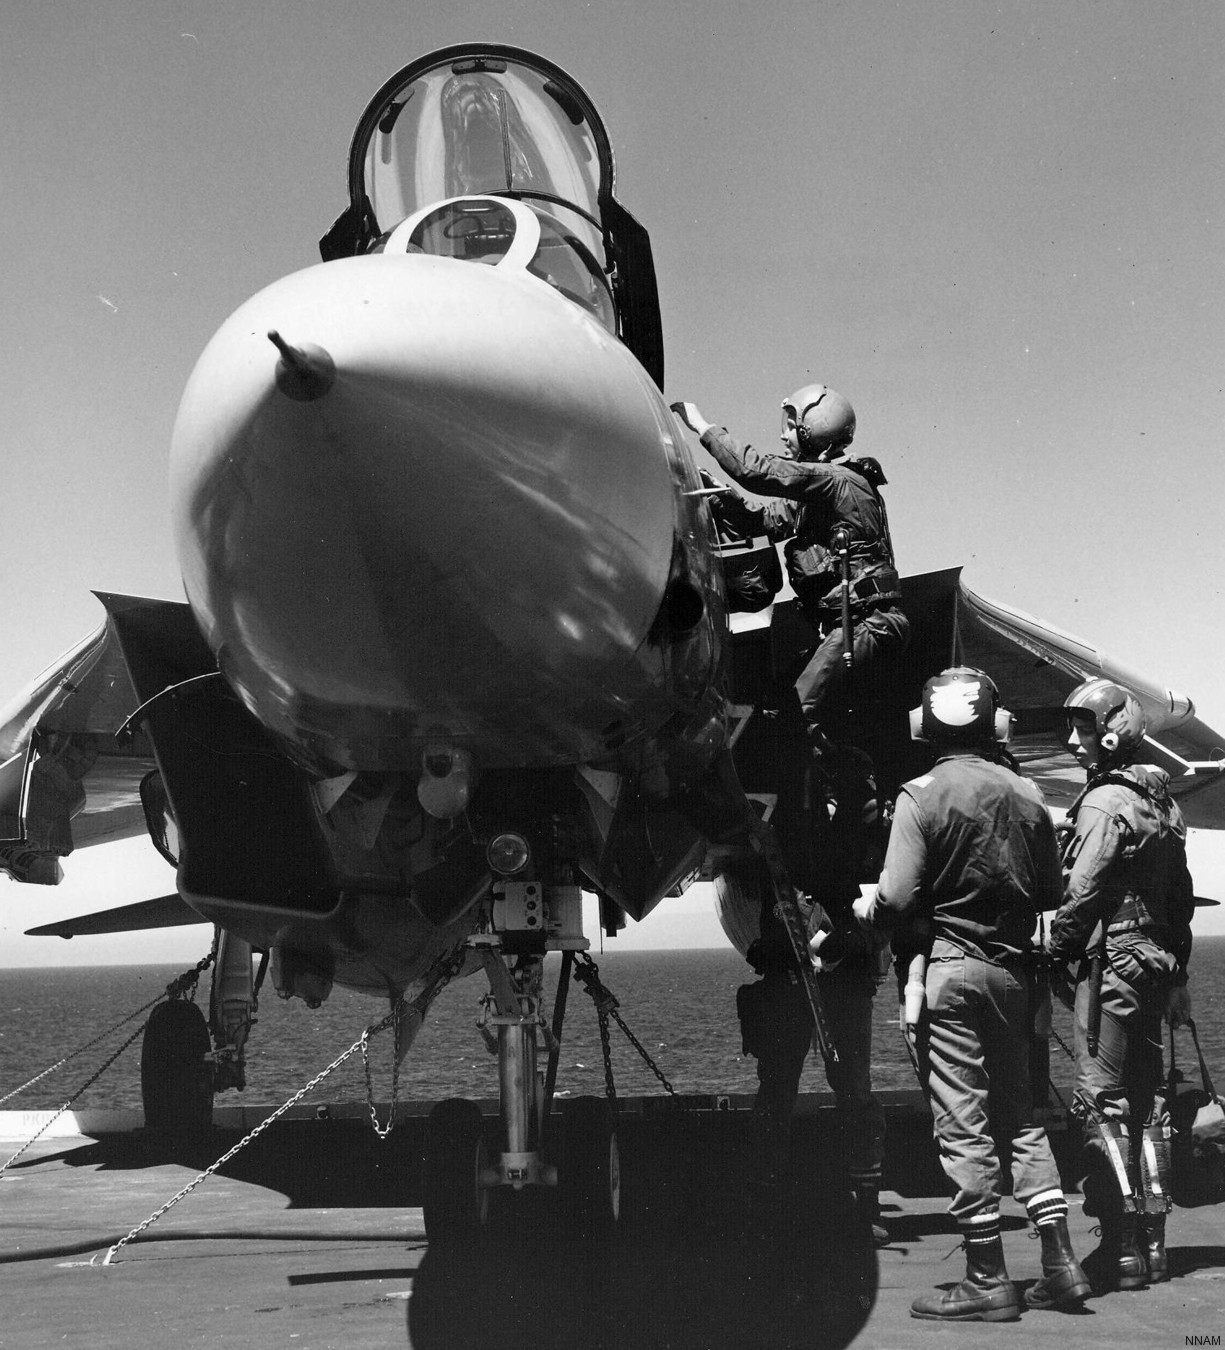 vf-1 wolfpack fighter squadron f-14a tomcat carrier air wing cvw-2 uss ranger cv-61 71